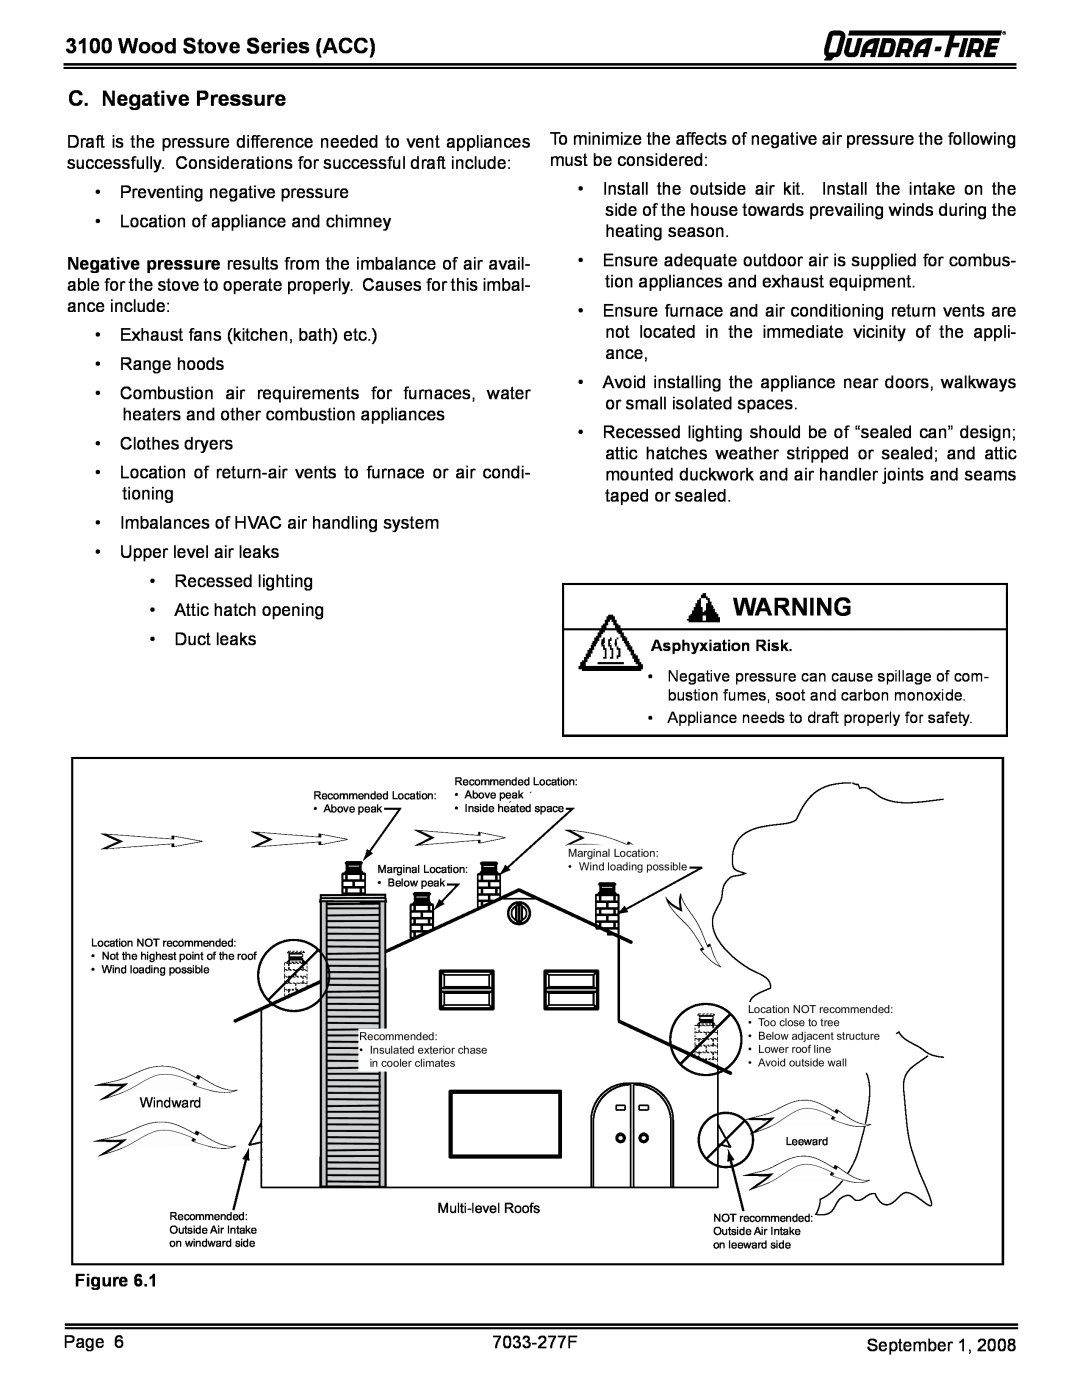 Hearth and Home Technologies 31ST-ACC owner manual C. Negative Pressure, Wood Stove Series ACC, Windward, Multi-level Roofs 